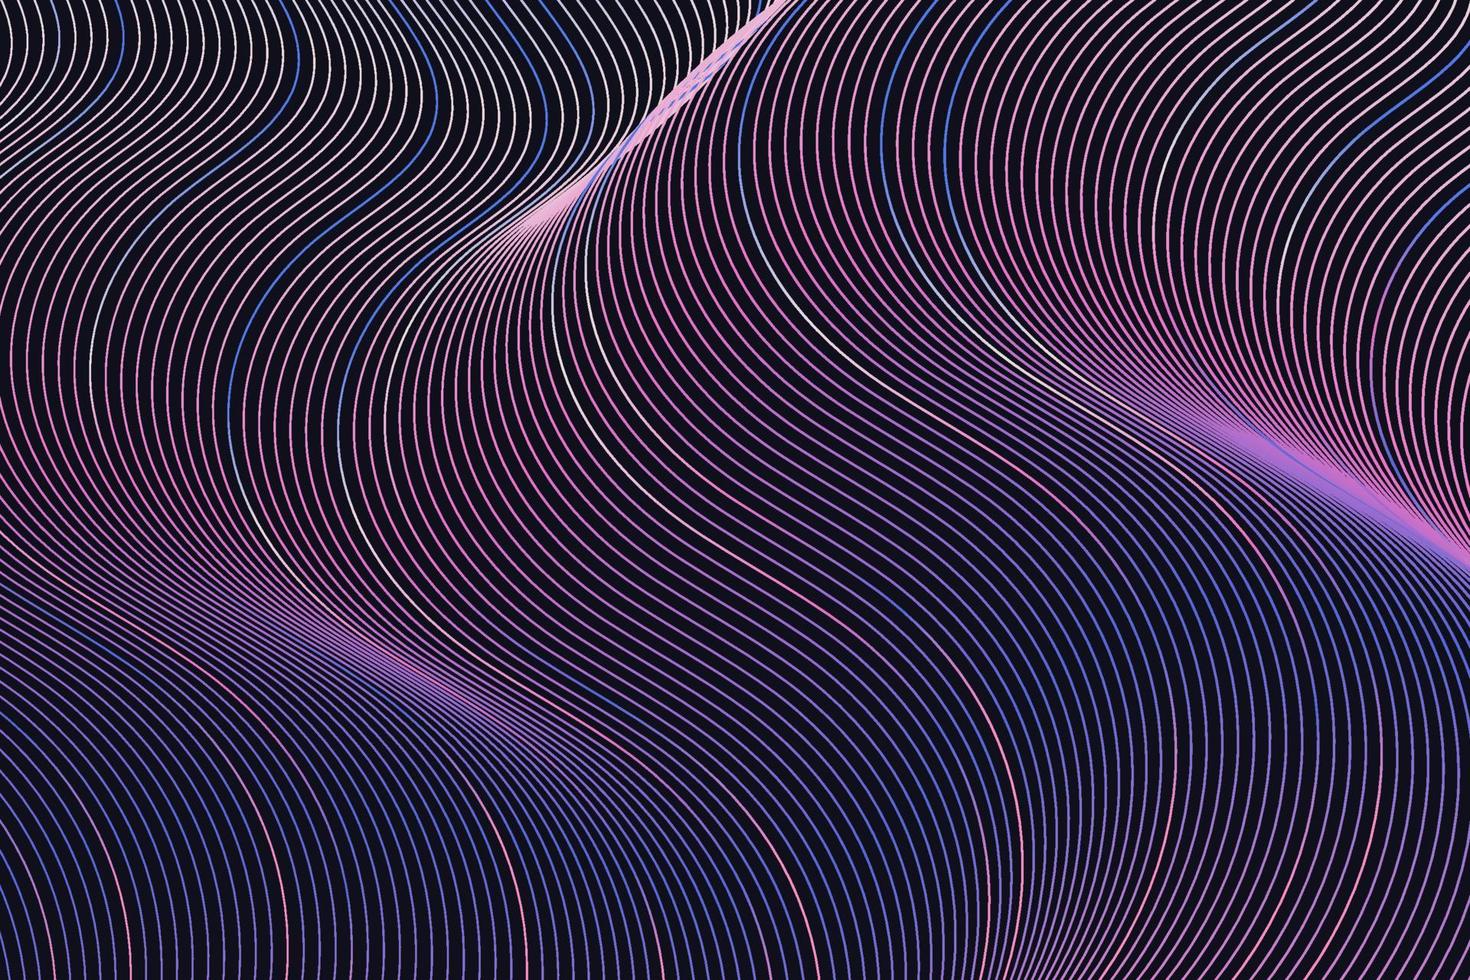 Wavy stripes. Abstract background with wavy lines. Wavy stripes for web design, website, wallpaper, banner, presentation, cover. vector